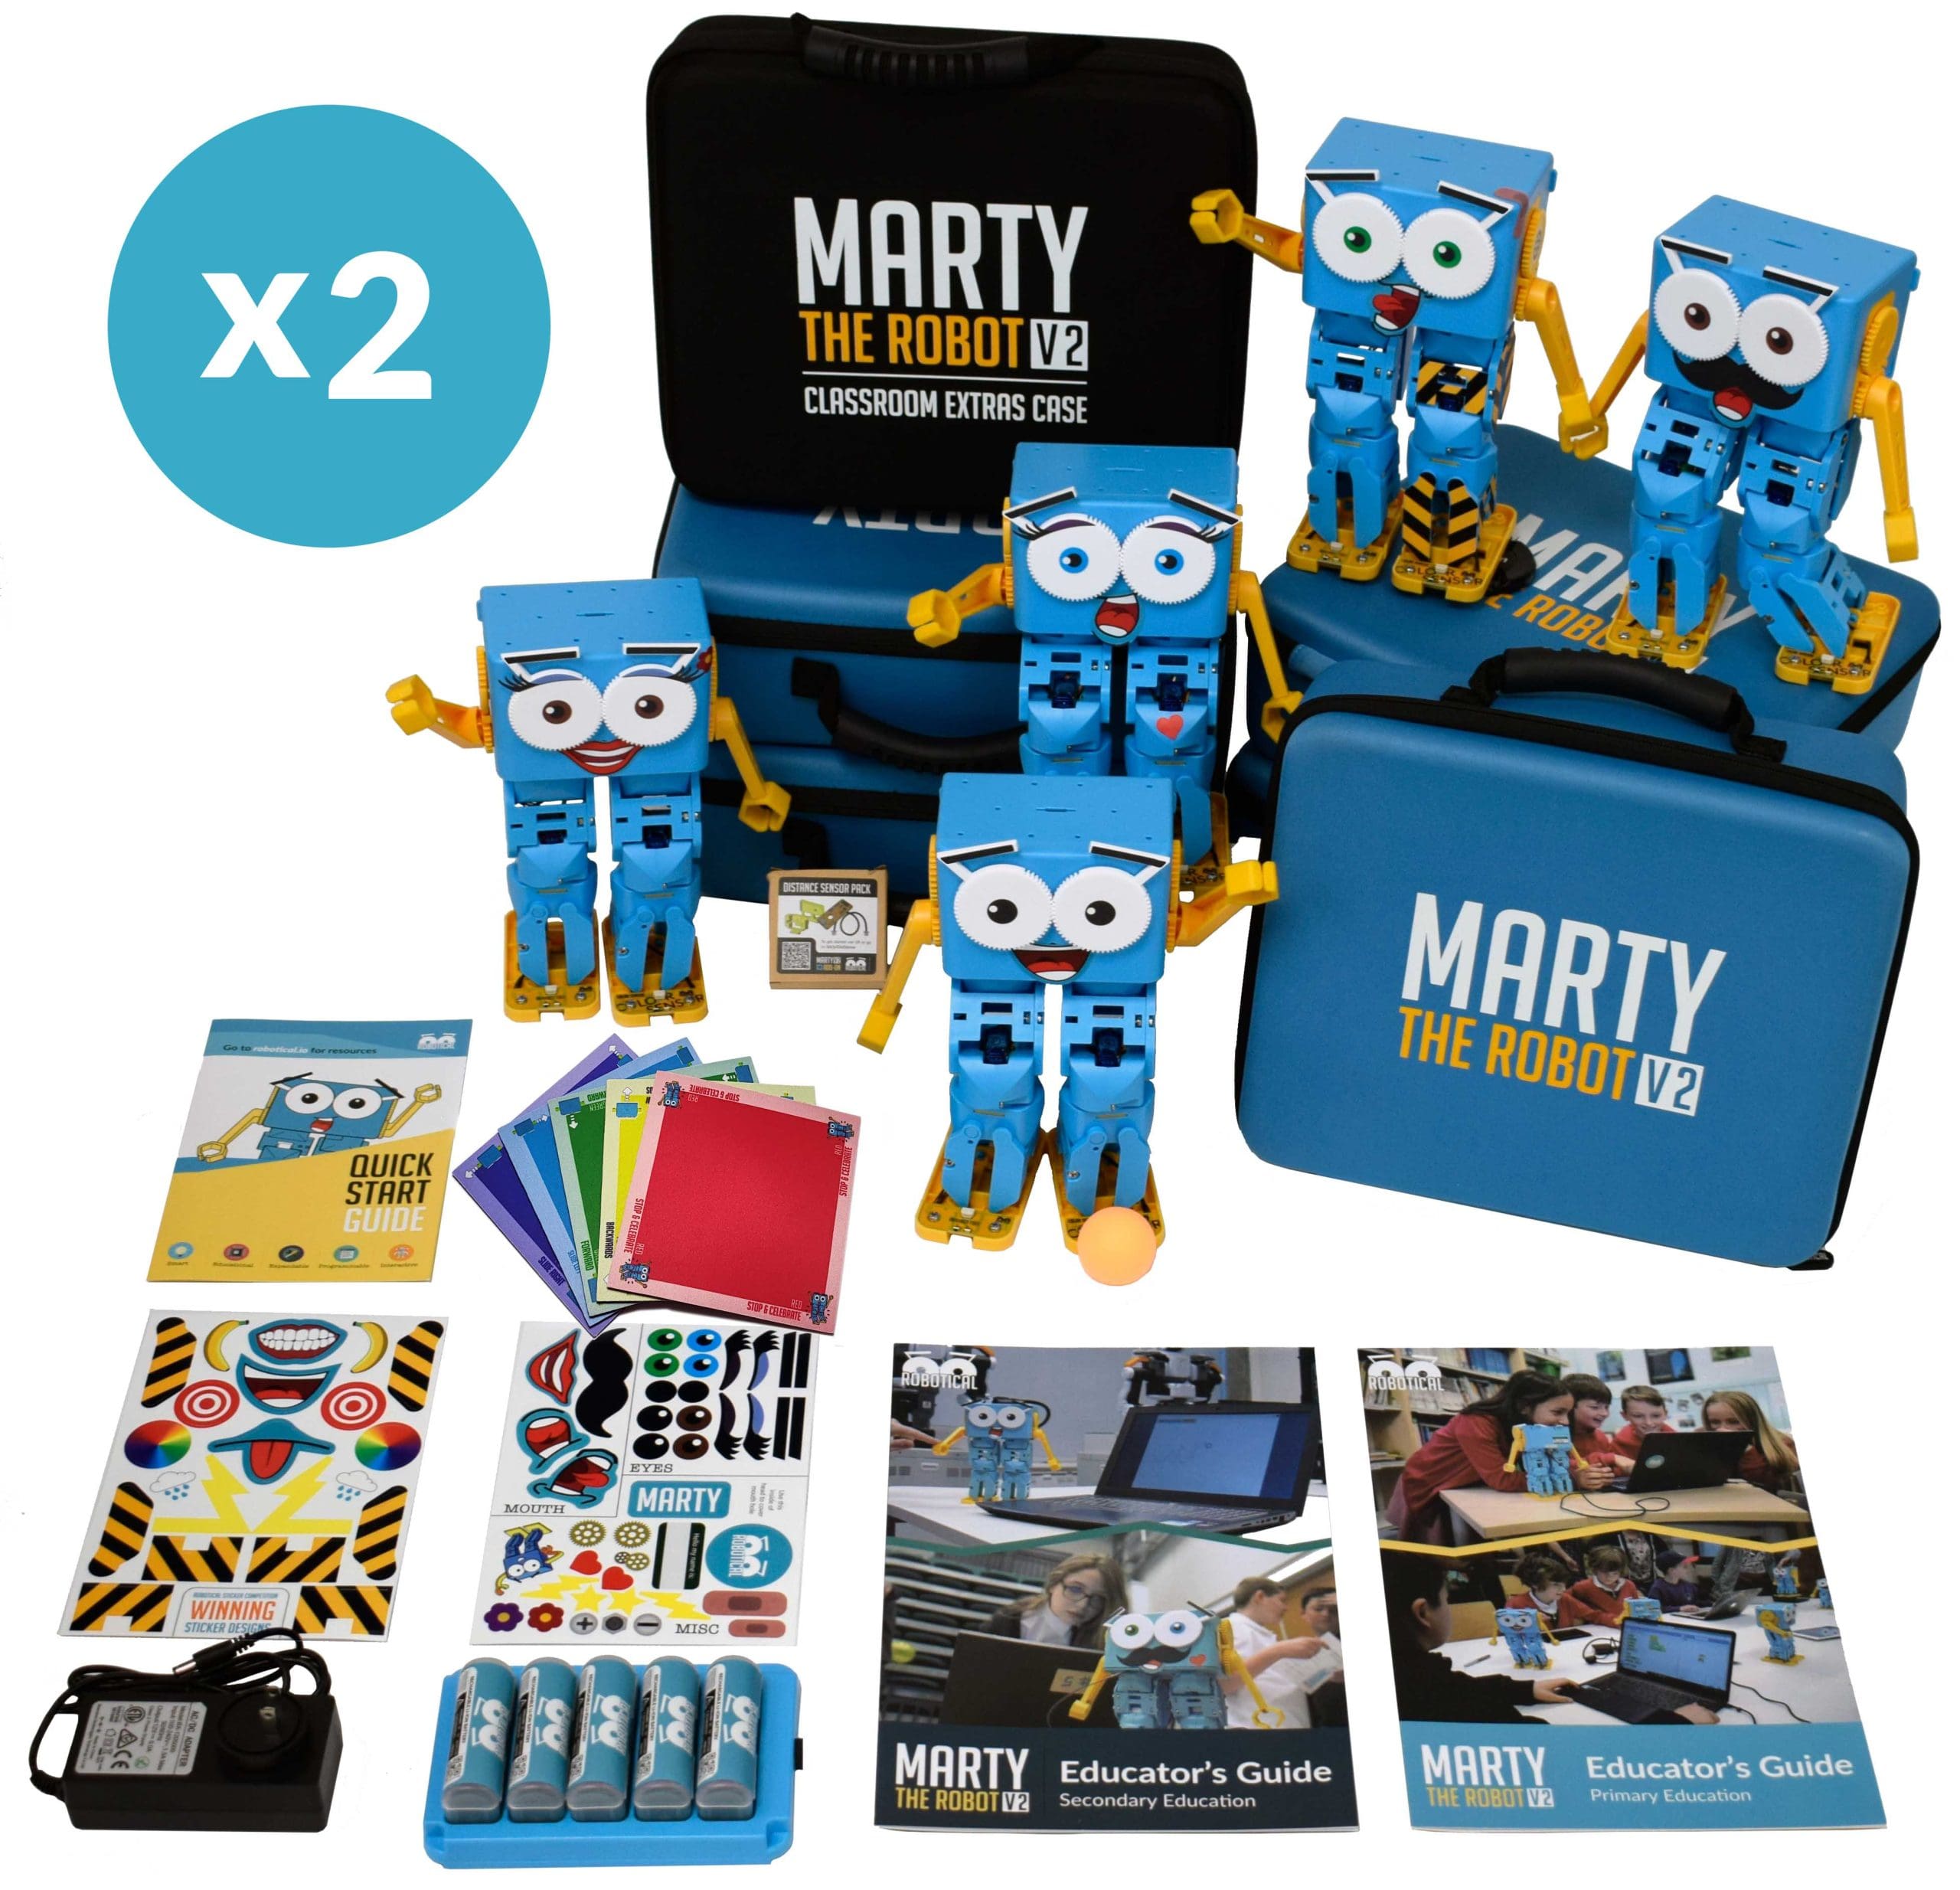 Bundle of 10 Marty the Robot V2s + classroom extras